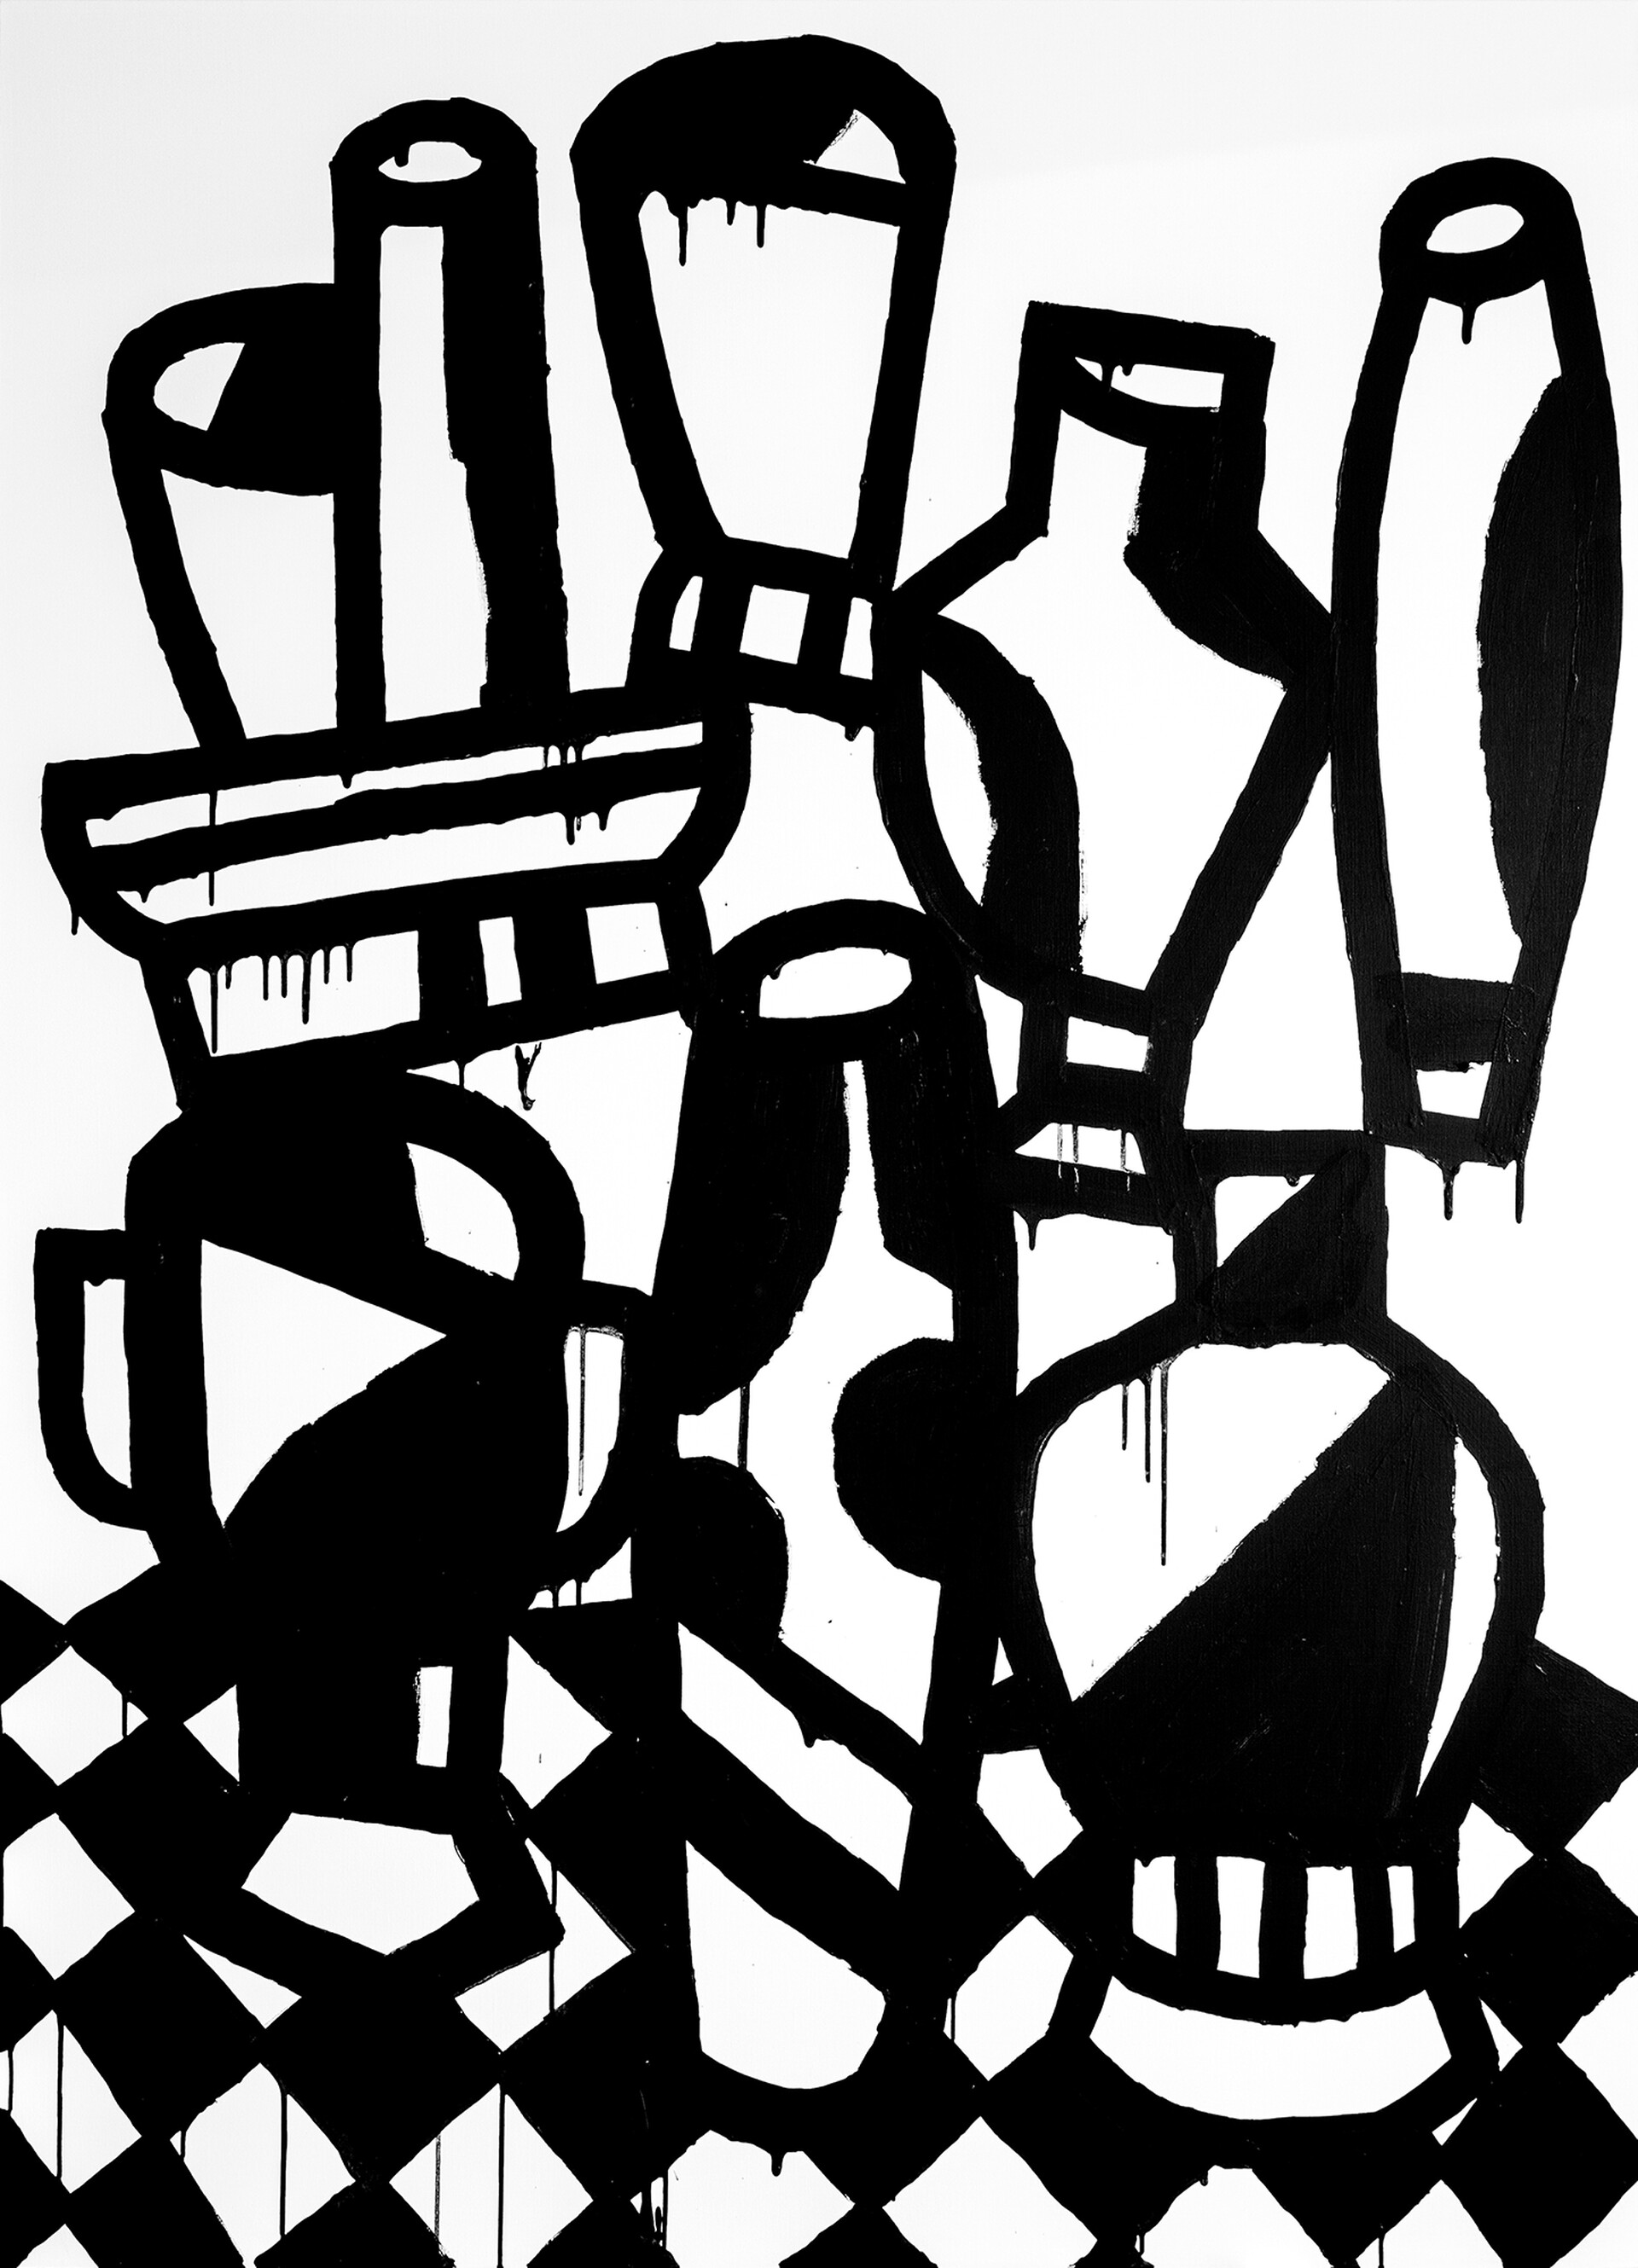 Amphoras”, series of black and white paintings, 180 x 130 cm, acrylic paint on canvas, 2020